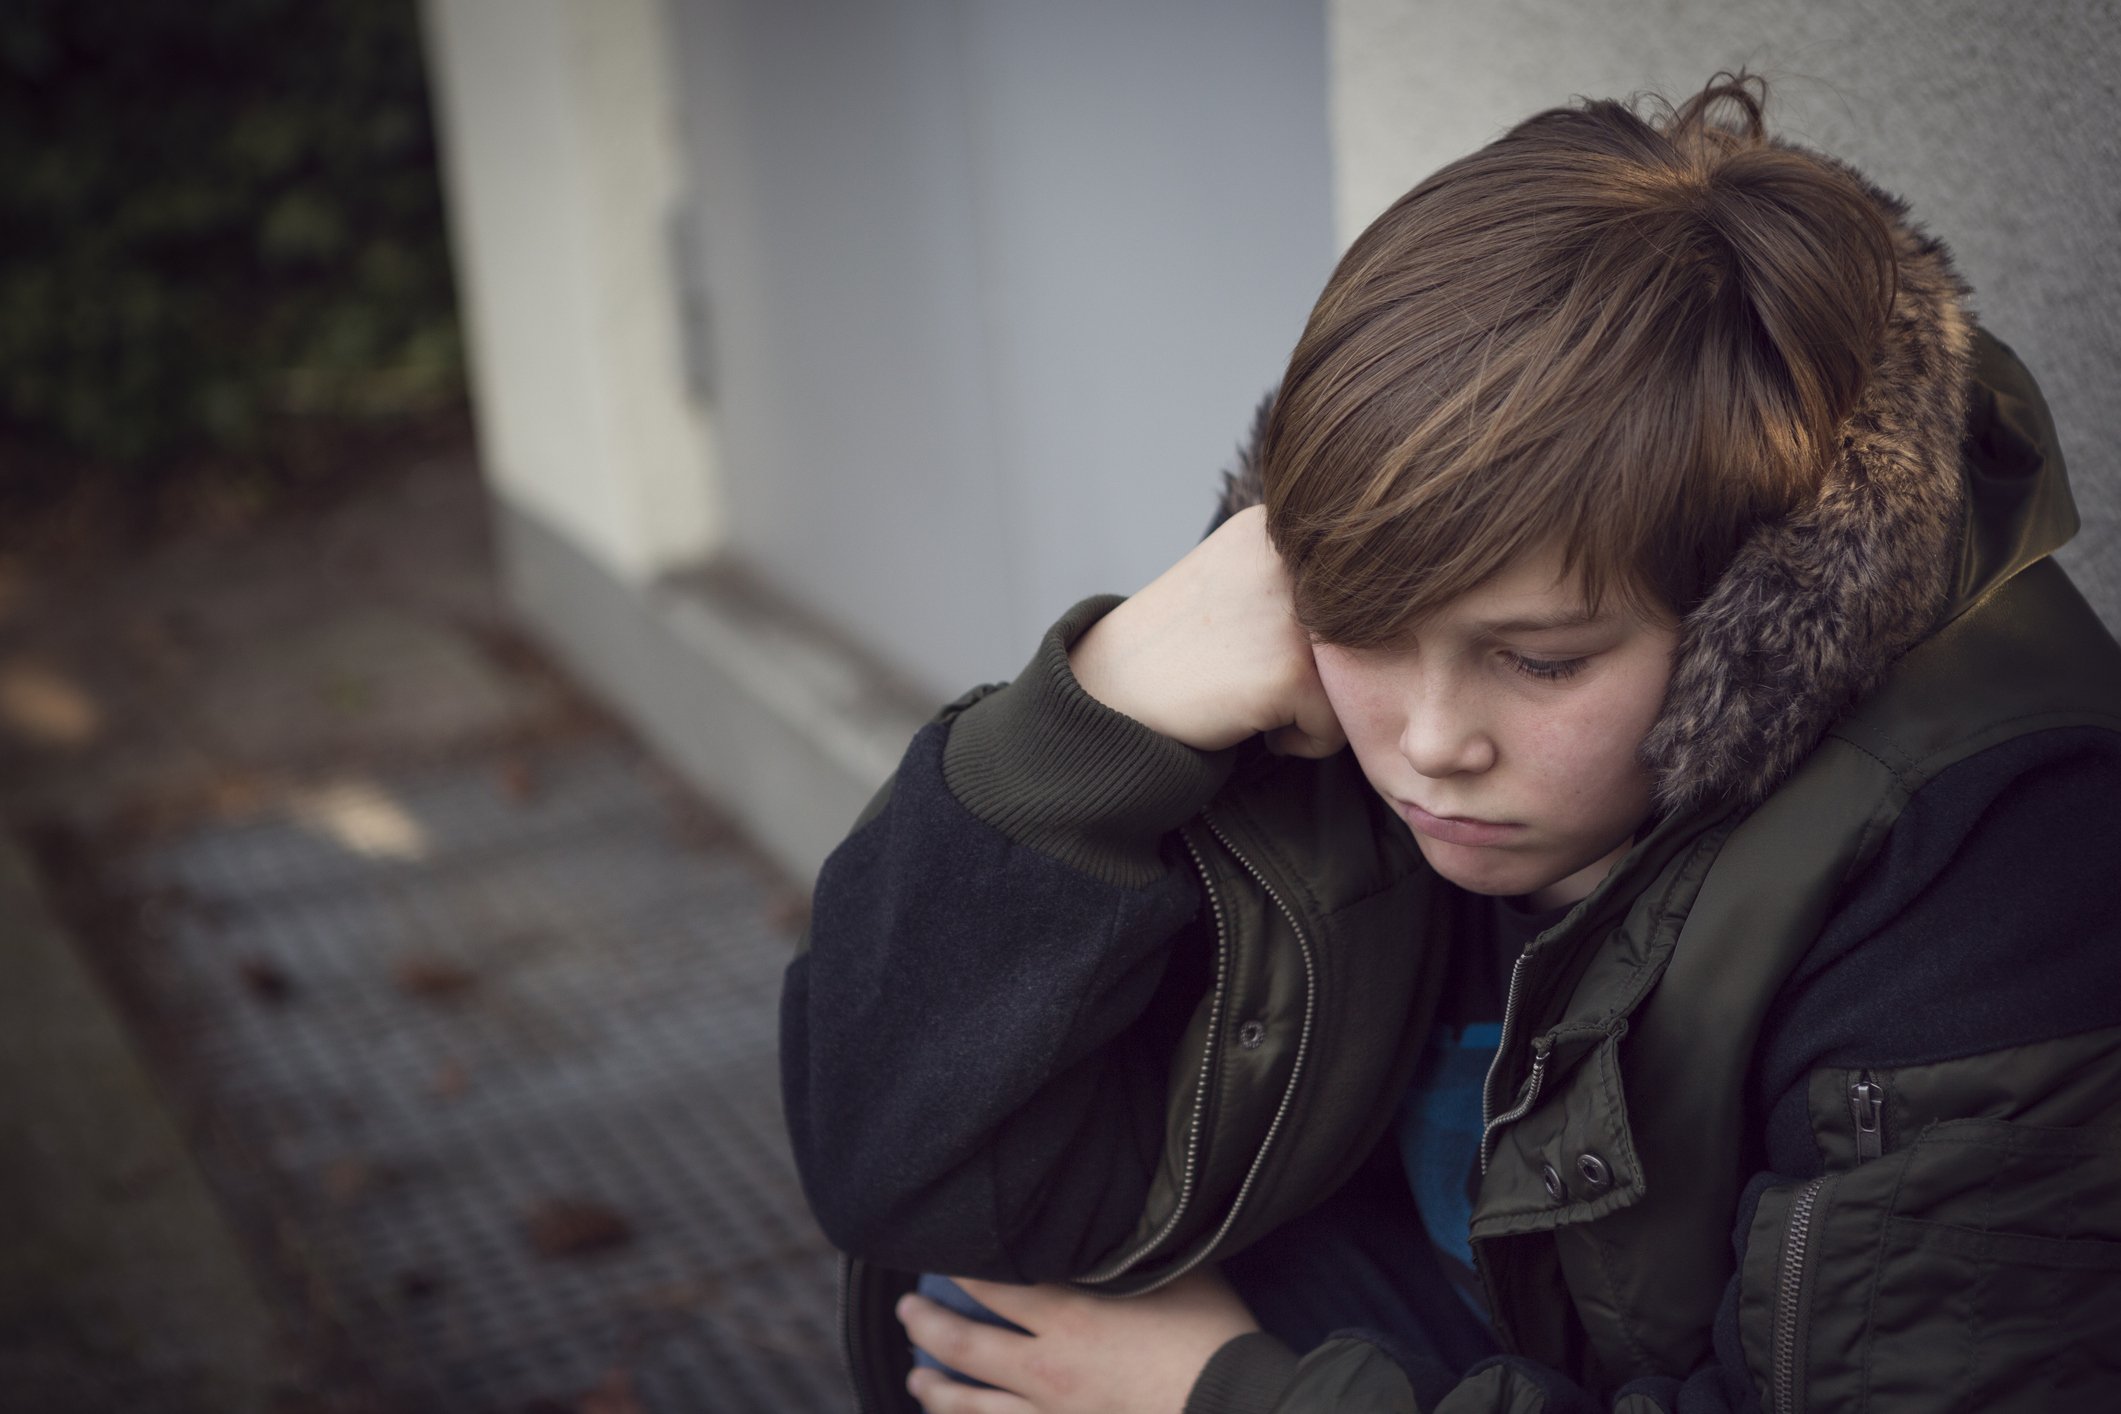 Max usually arrived home sad with a teary eye from school. | Photo: Getty Images